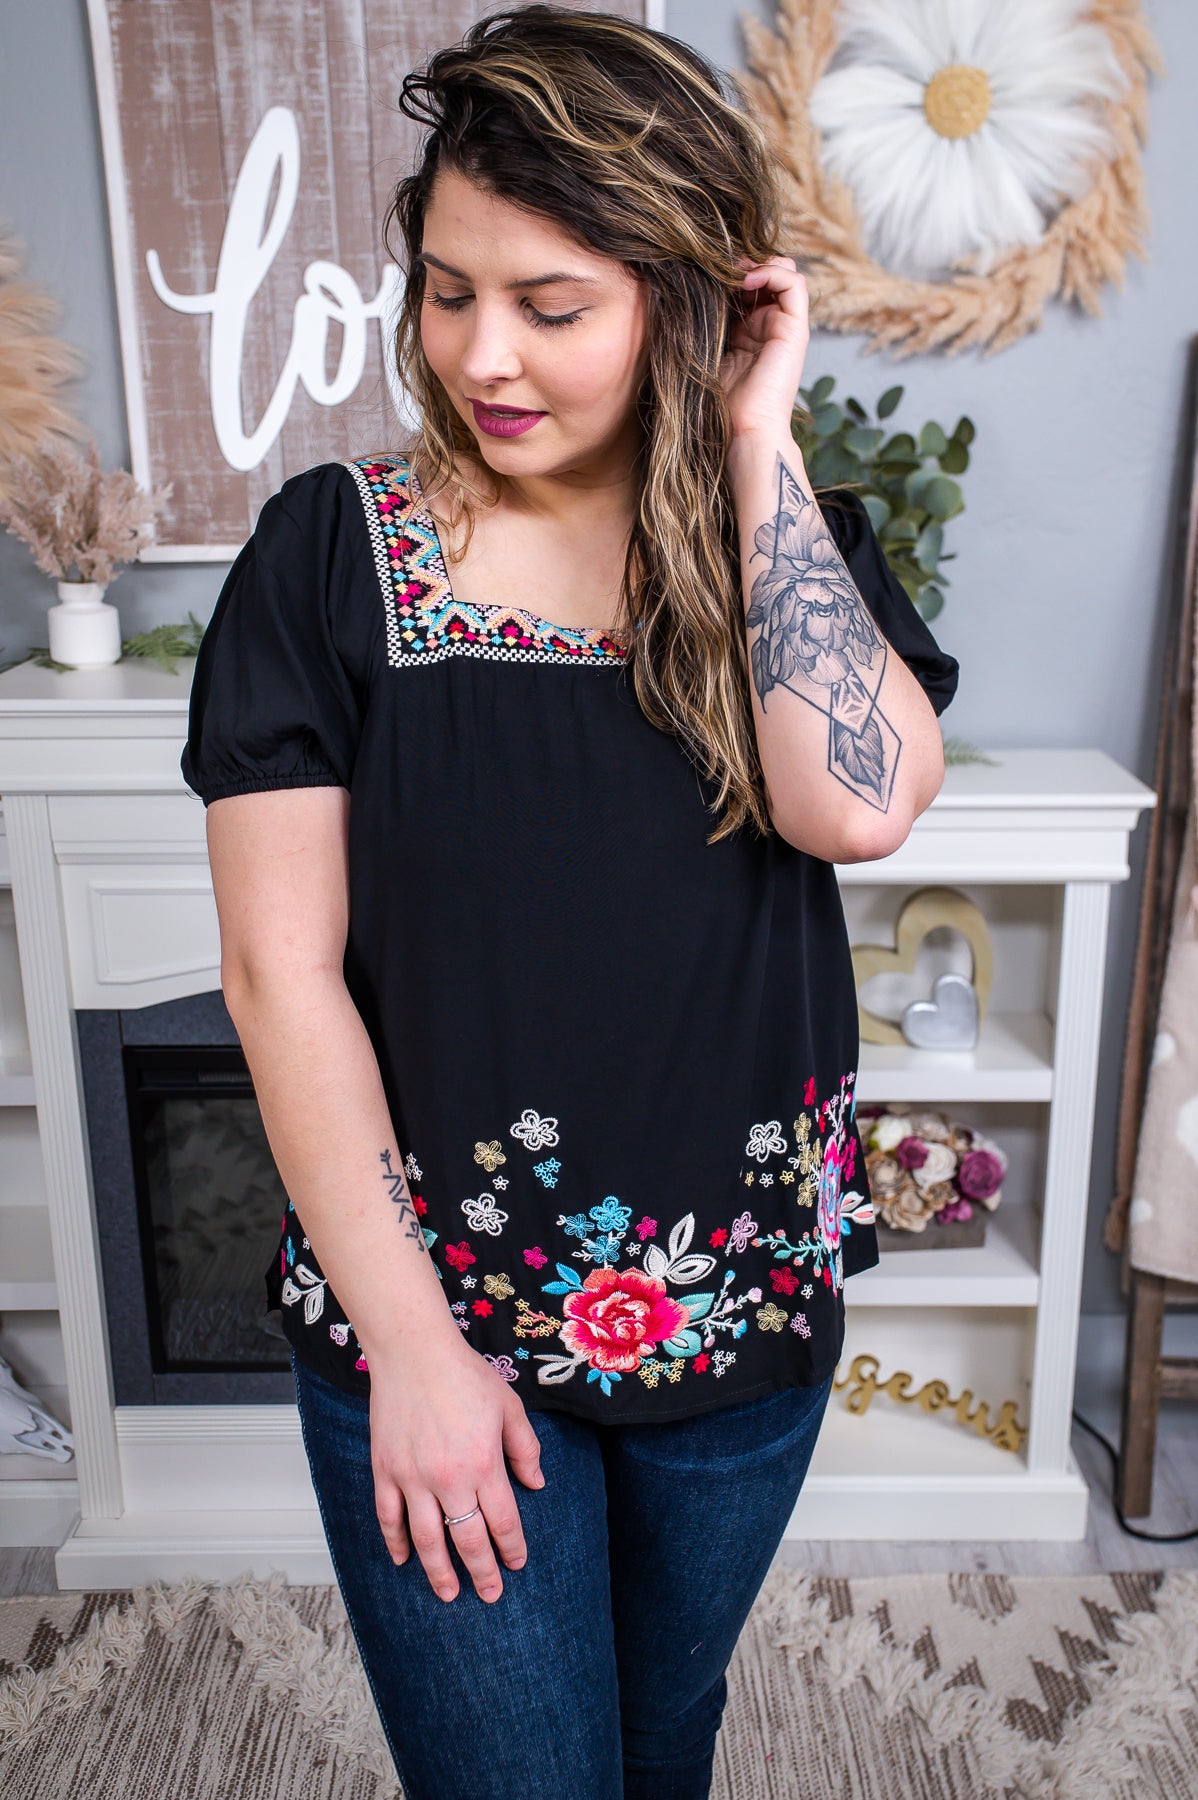 True Visionary Black/Multi Color Tribal/Floral Embroidered Top - T6502BK